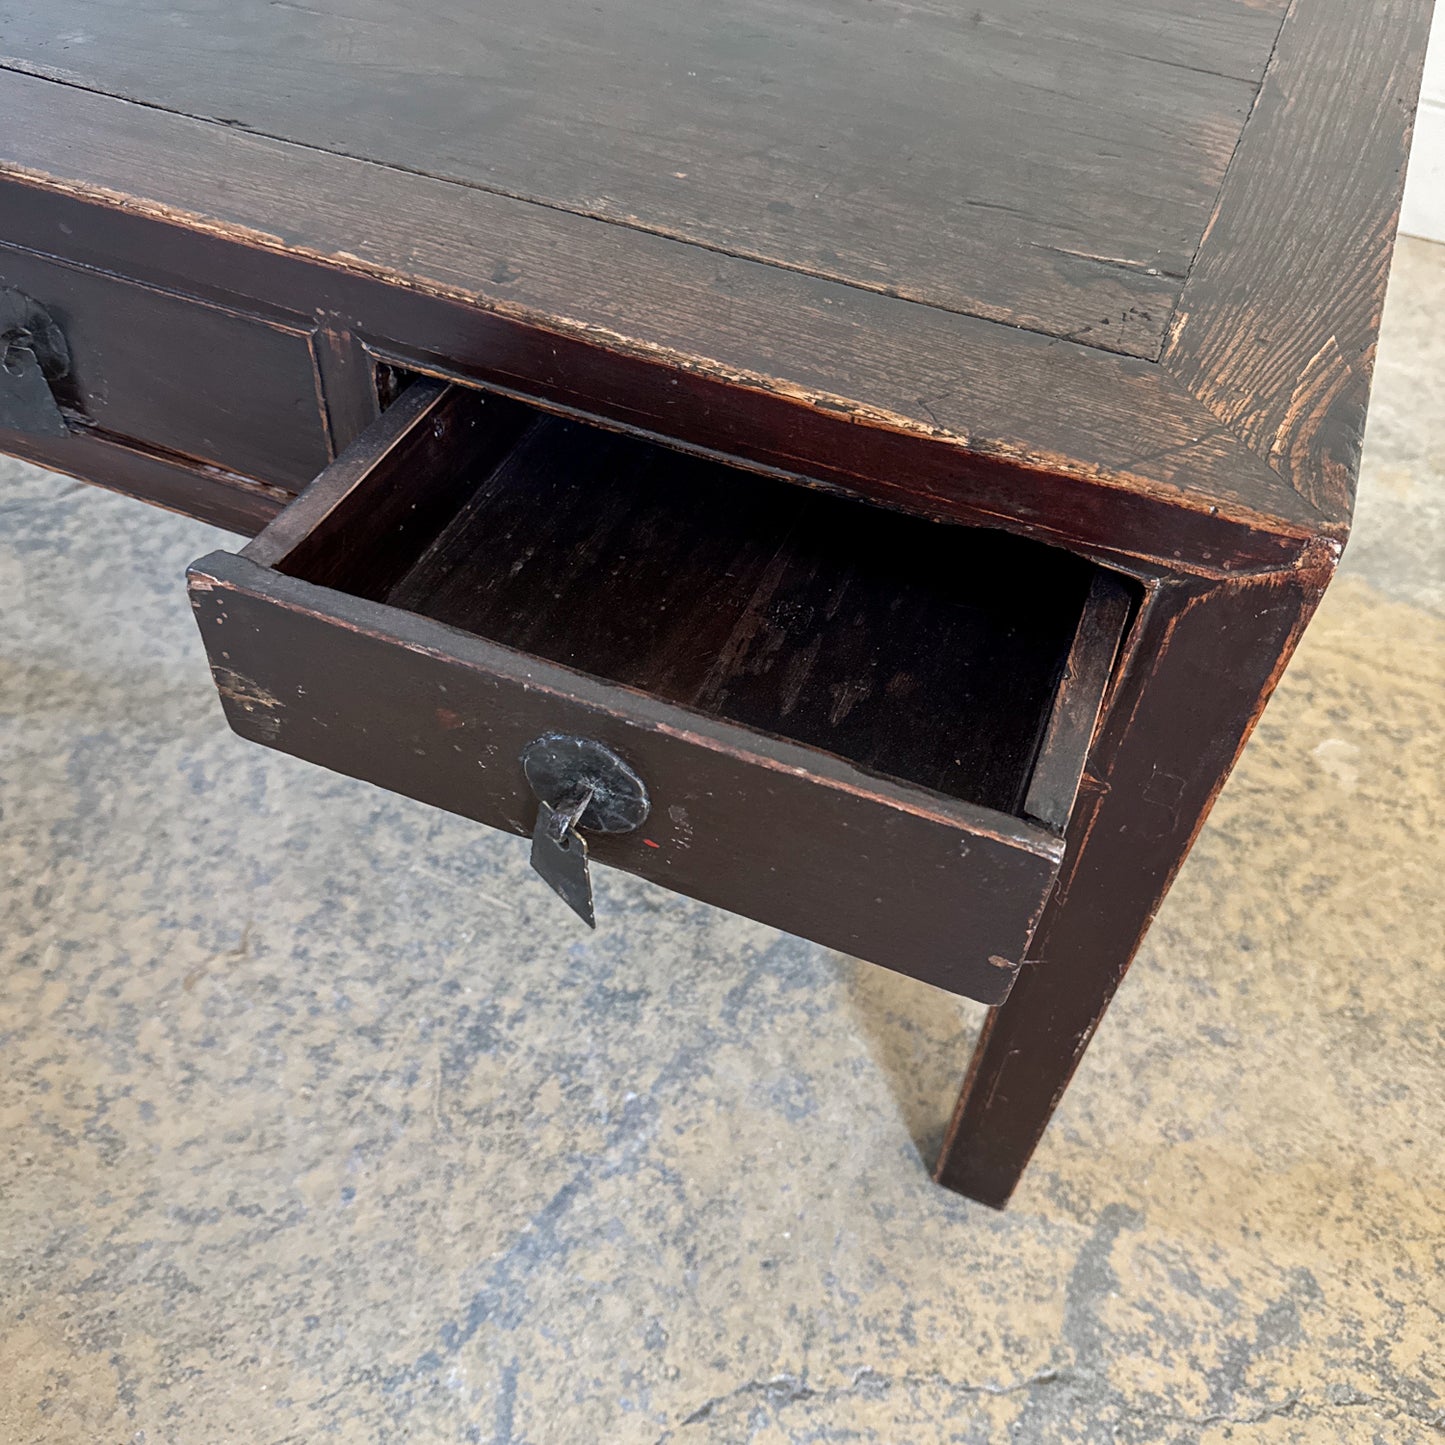 Vintage 3 Drawer Asian Coffee Table